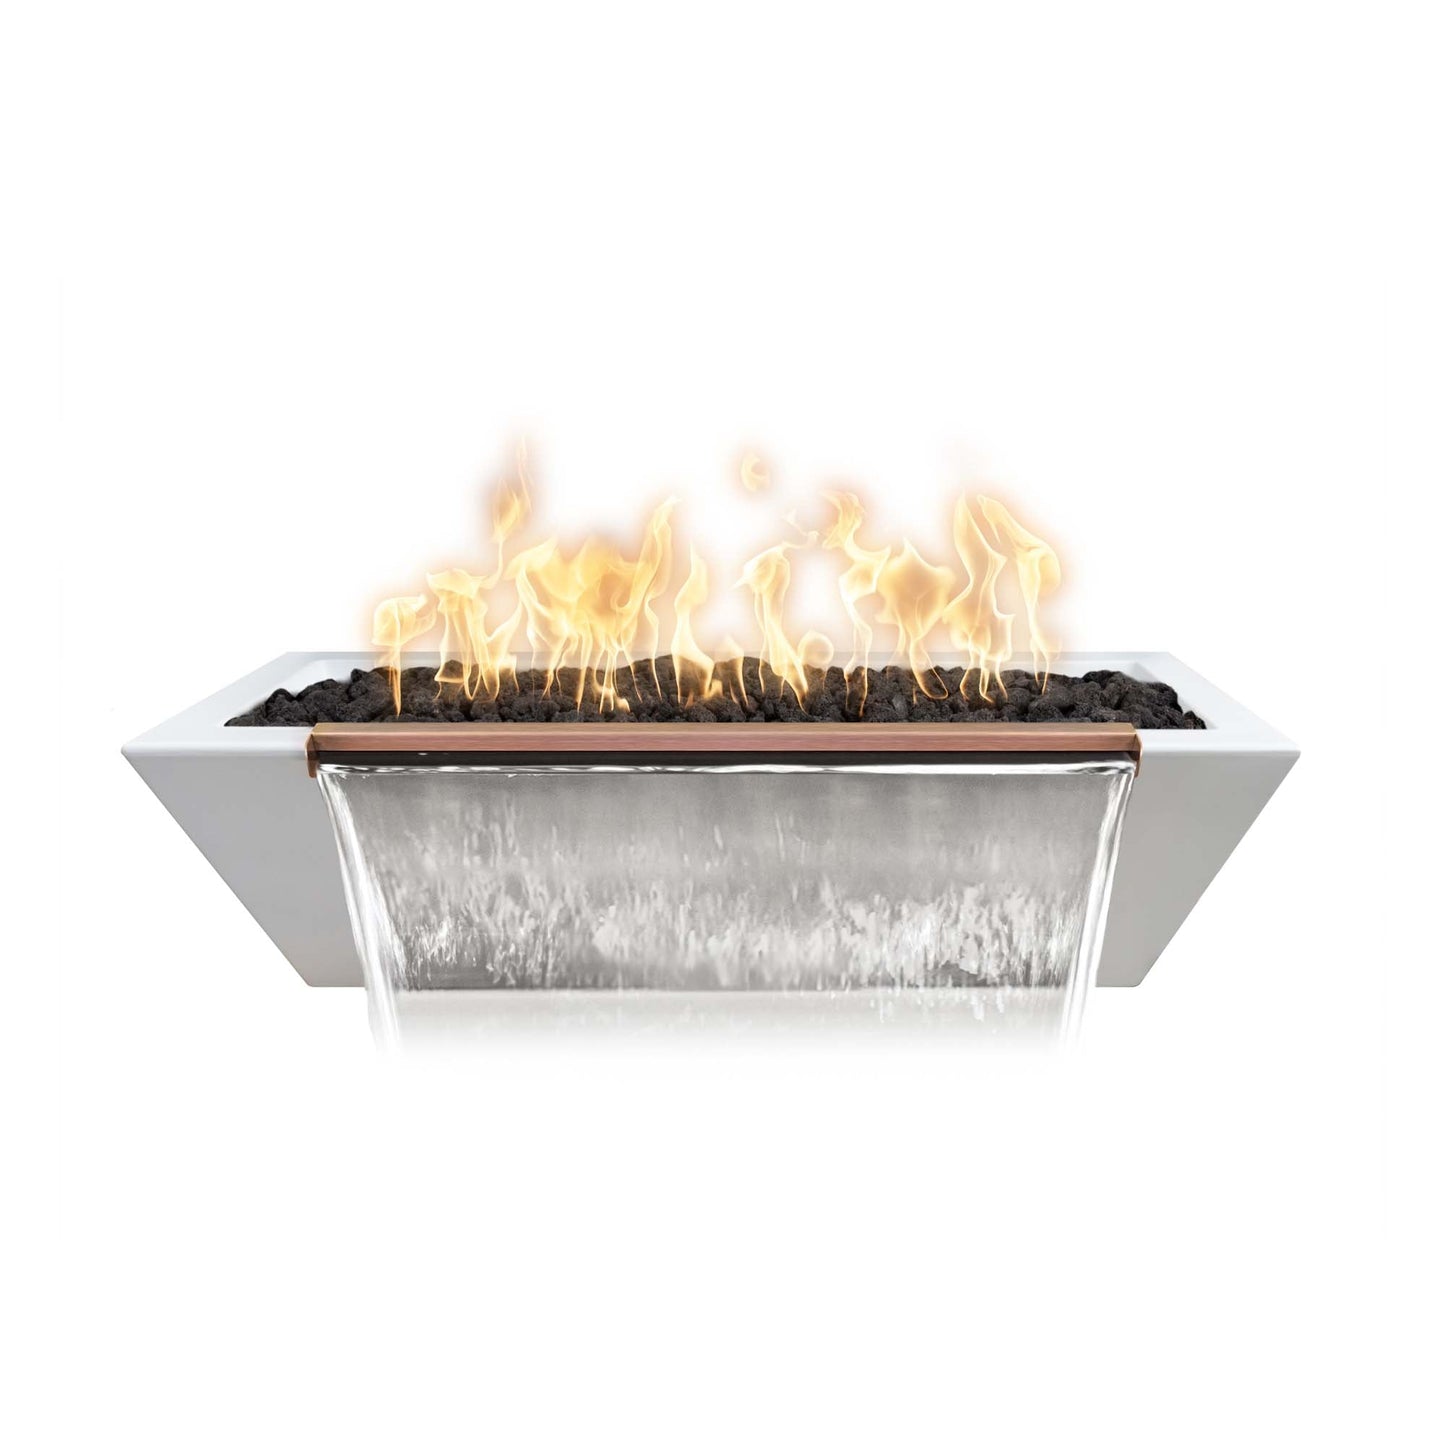 The Outdoor Plus Linear Maya 72" Metallic Bronze GFRC Concrete Natural Gas Fire & Water Bowl with Match Lit with Flame Sense Ignition